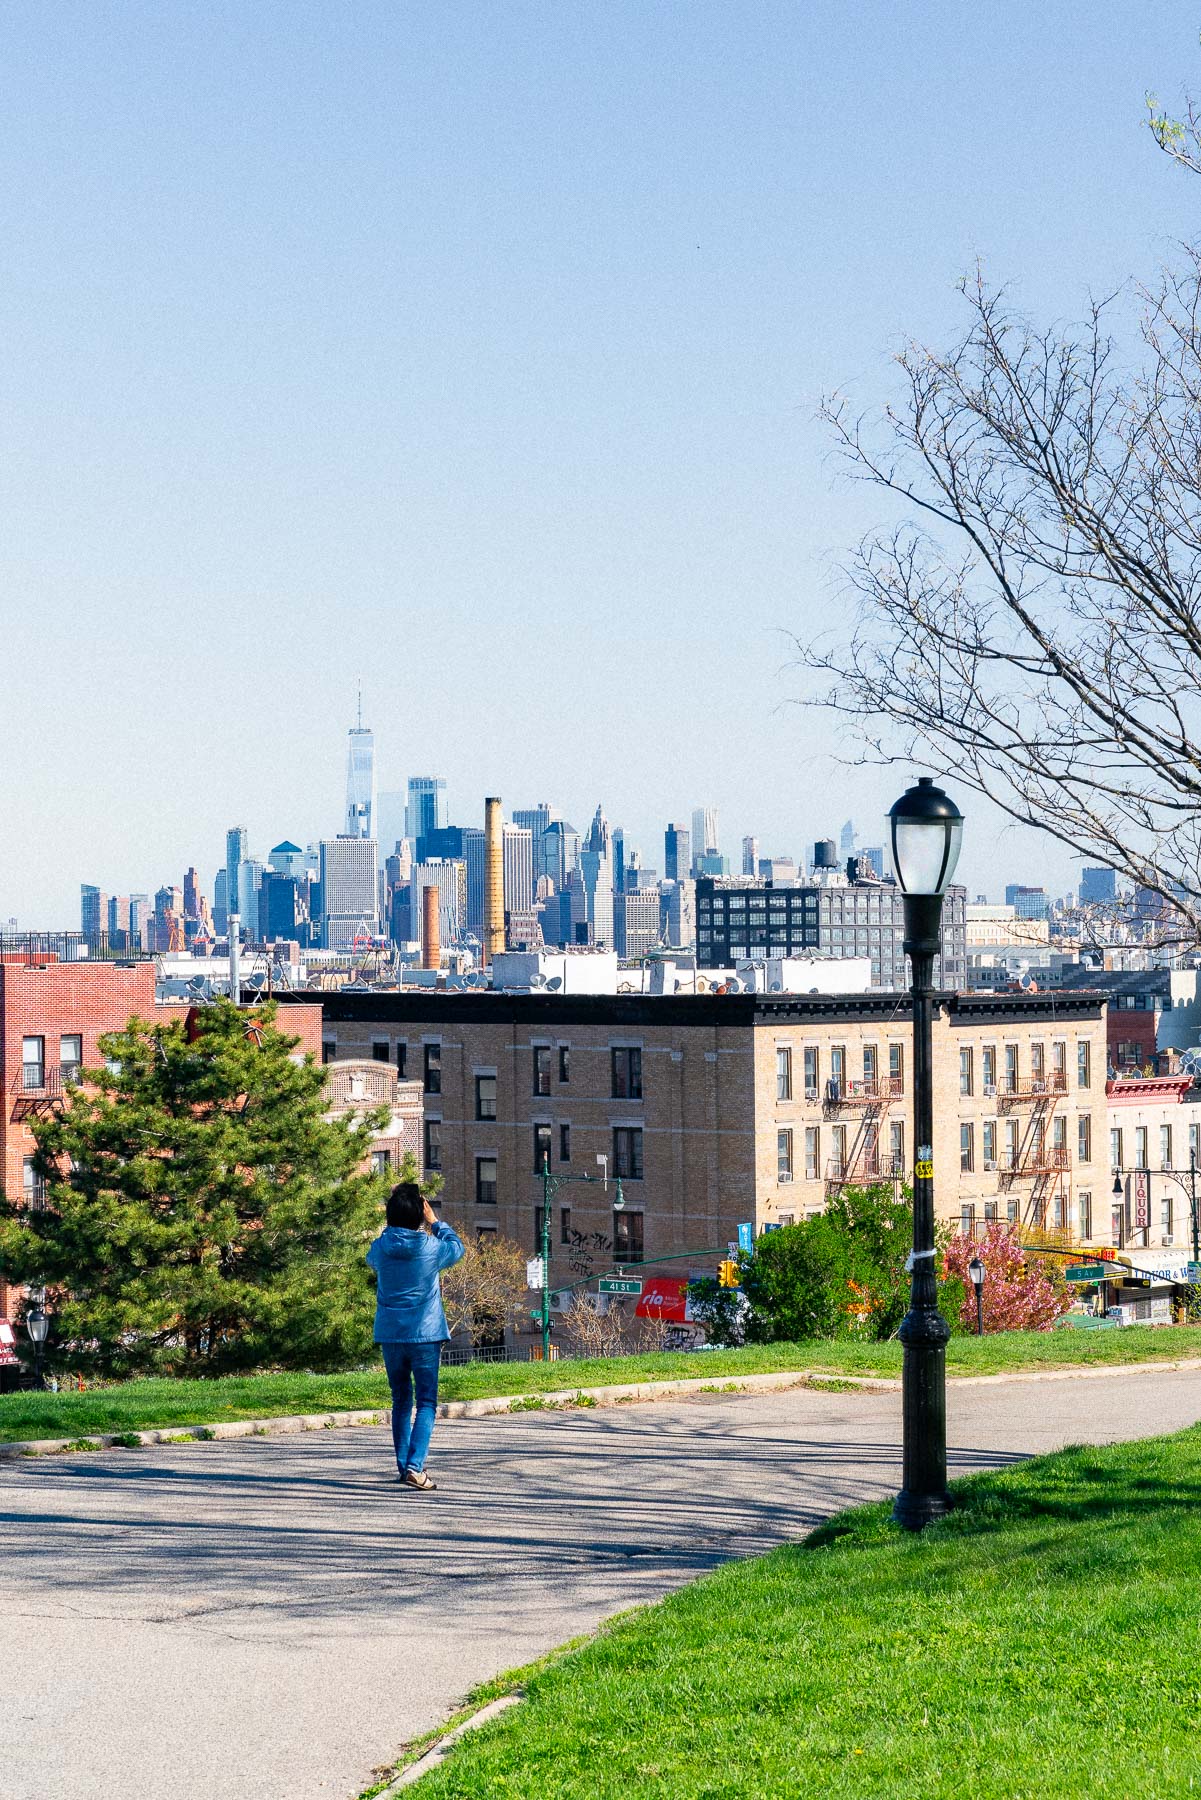 Woman in a blue jacket and jeans stopping to take a photo along the pathway of Sunset Park Brooklyn next to a lamppost, with a view of the NYC Skyline in the background